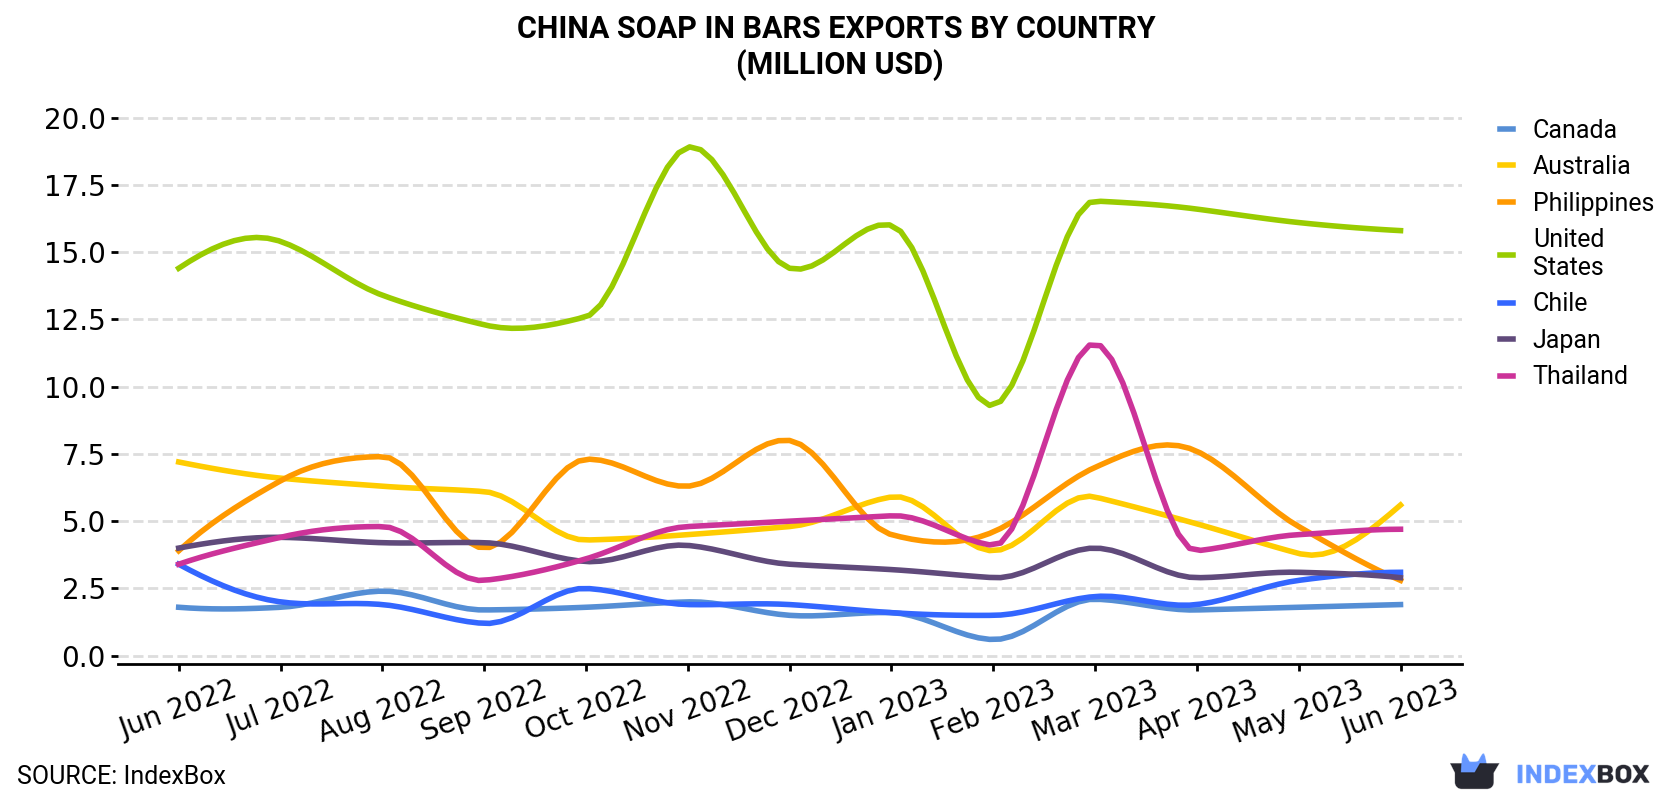 China Soap In Bars Exports By Country (Million USD)